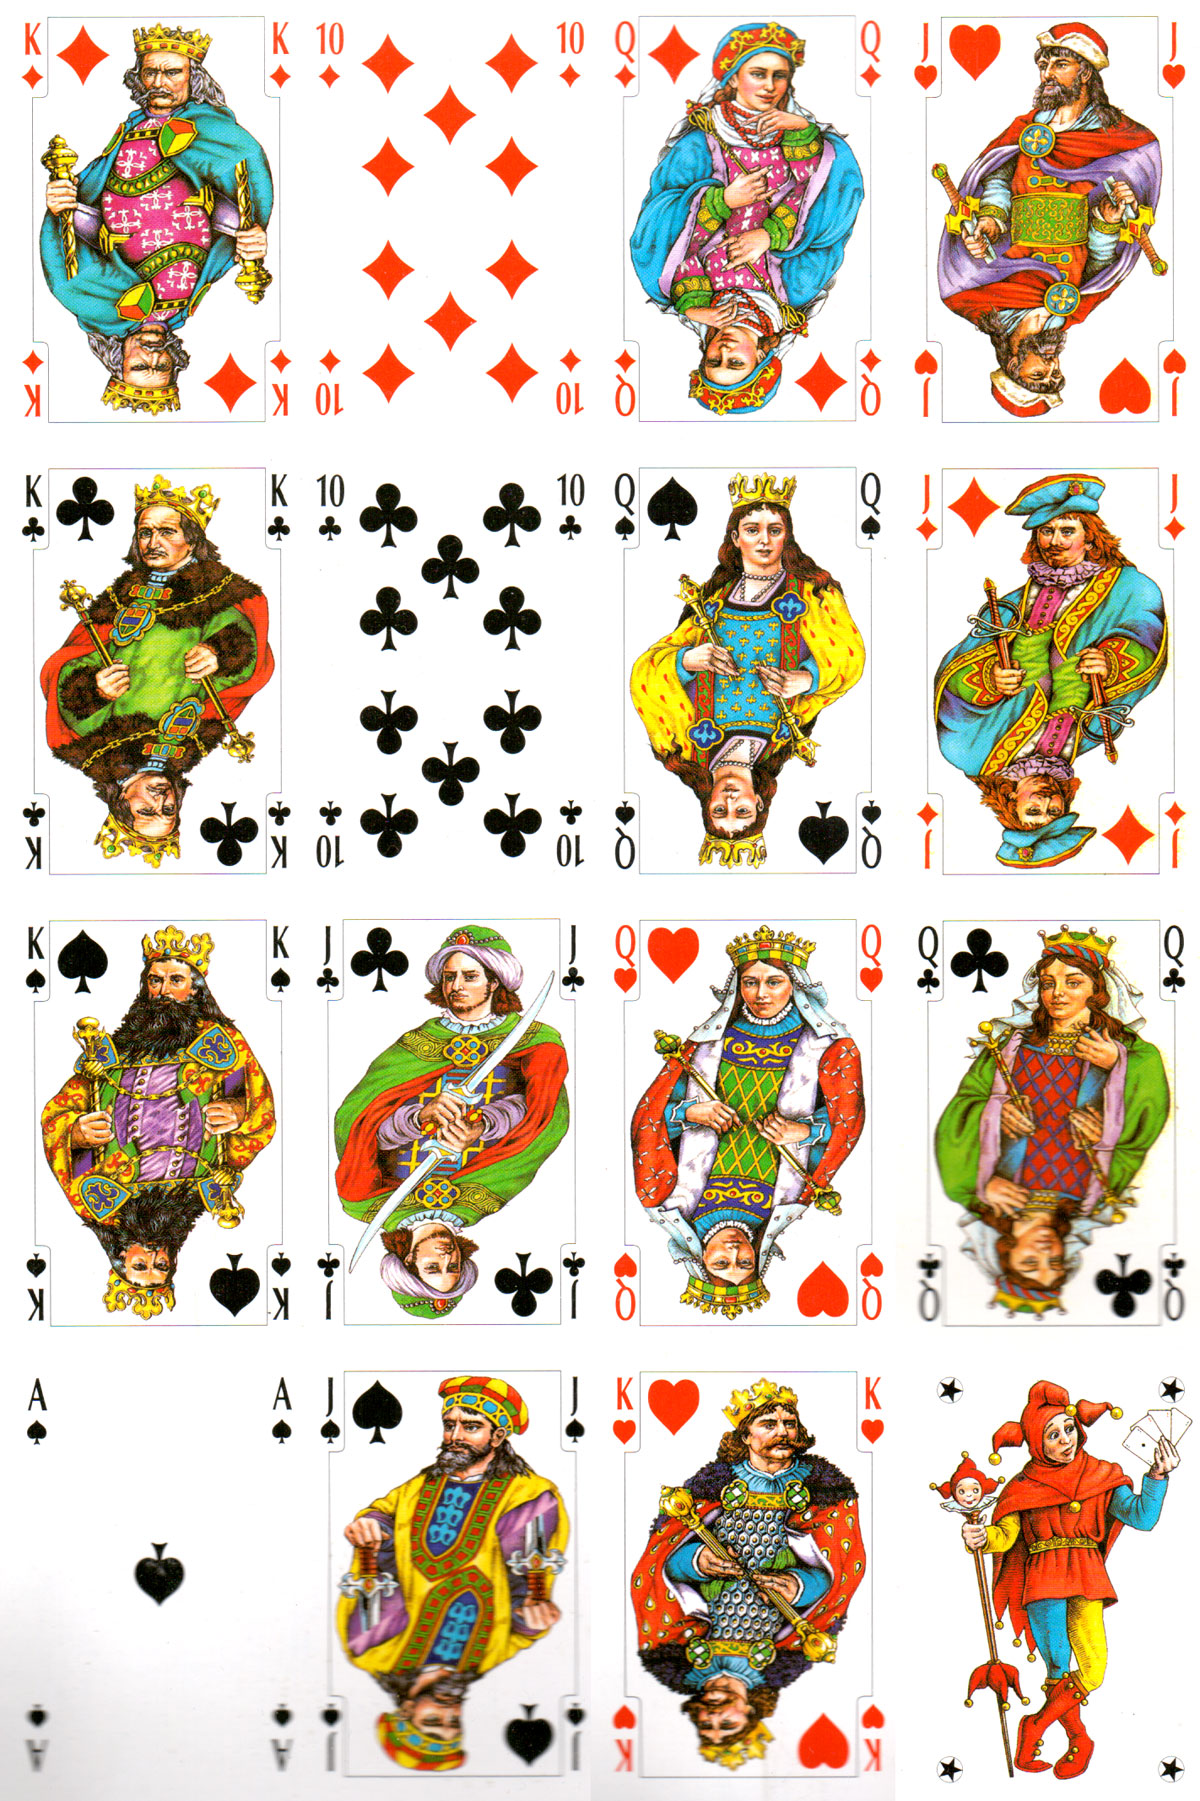 ‘Królewskie’ playing cards with Slavic style courts, printed by KZWP-Trefl, 2002